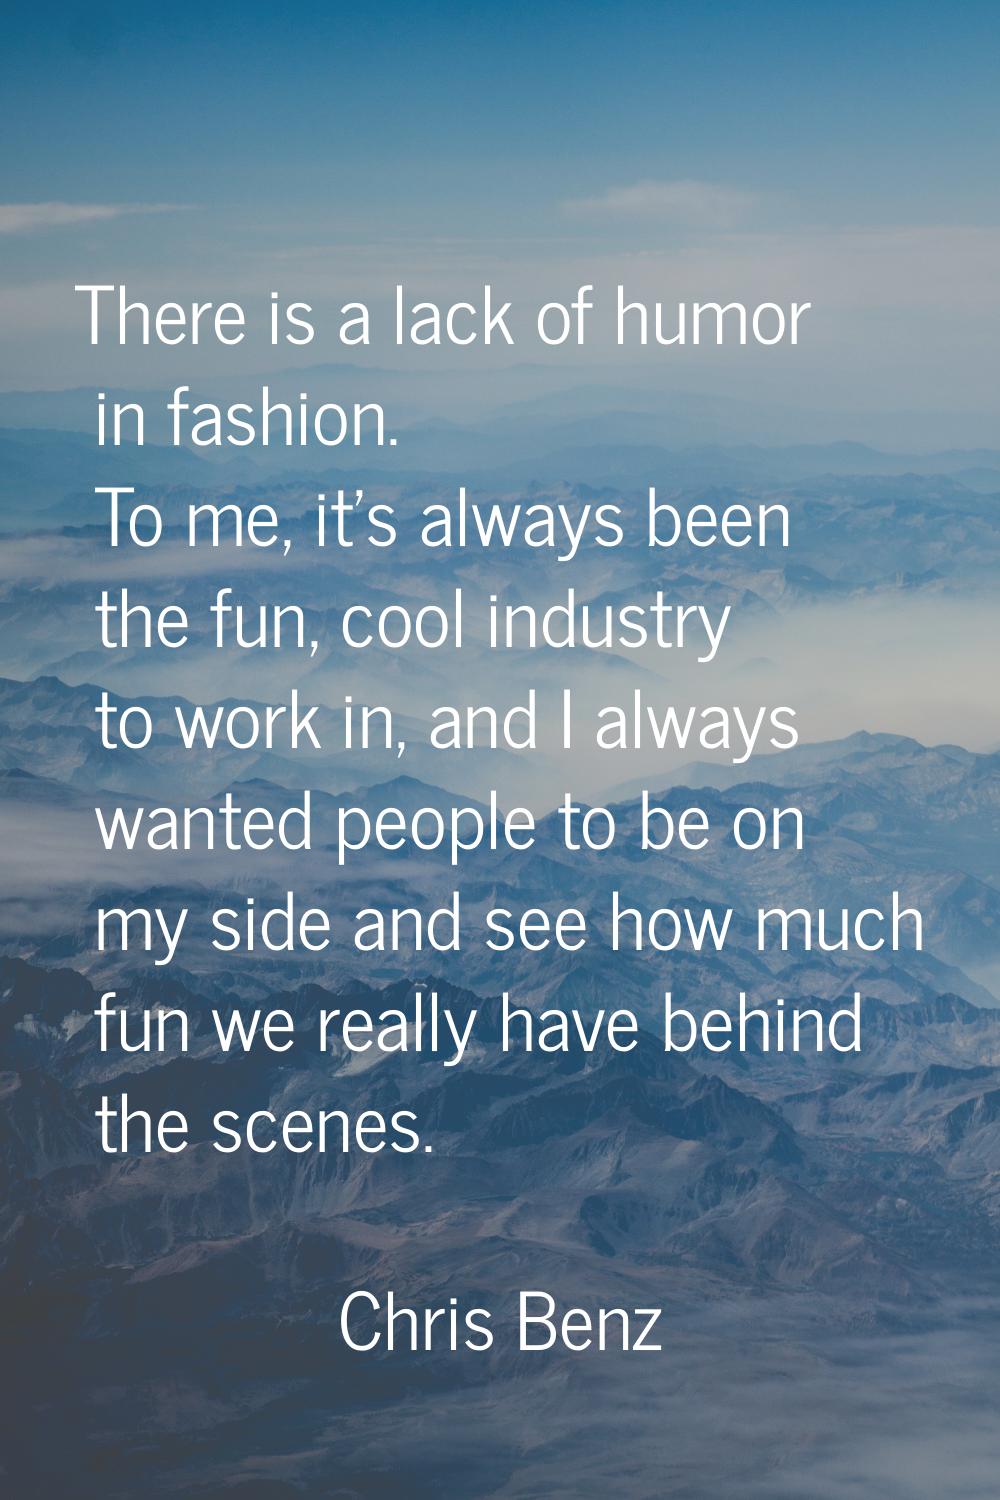 There is a lack of humor in fashion. To me, it's always been the fun, cool industry to work in, and